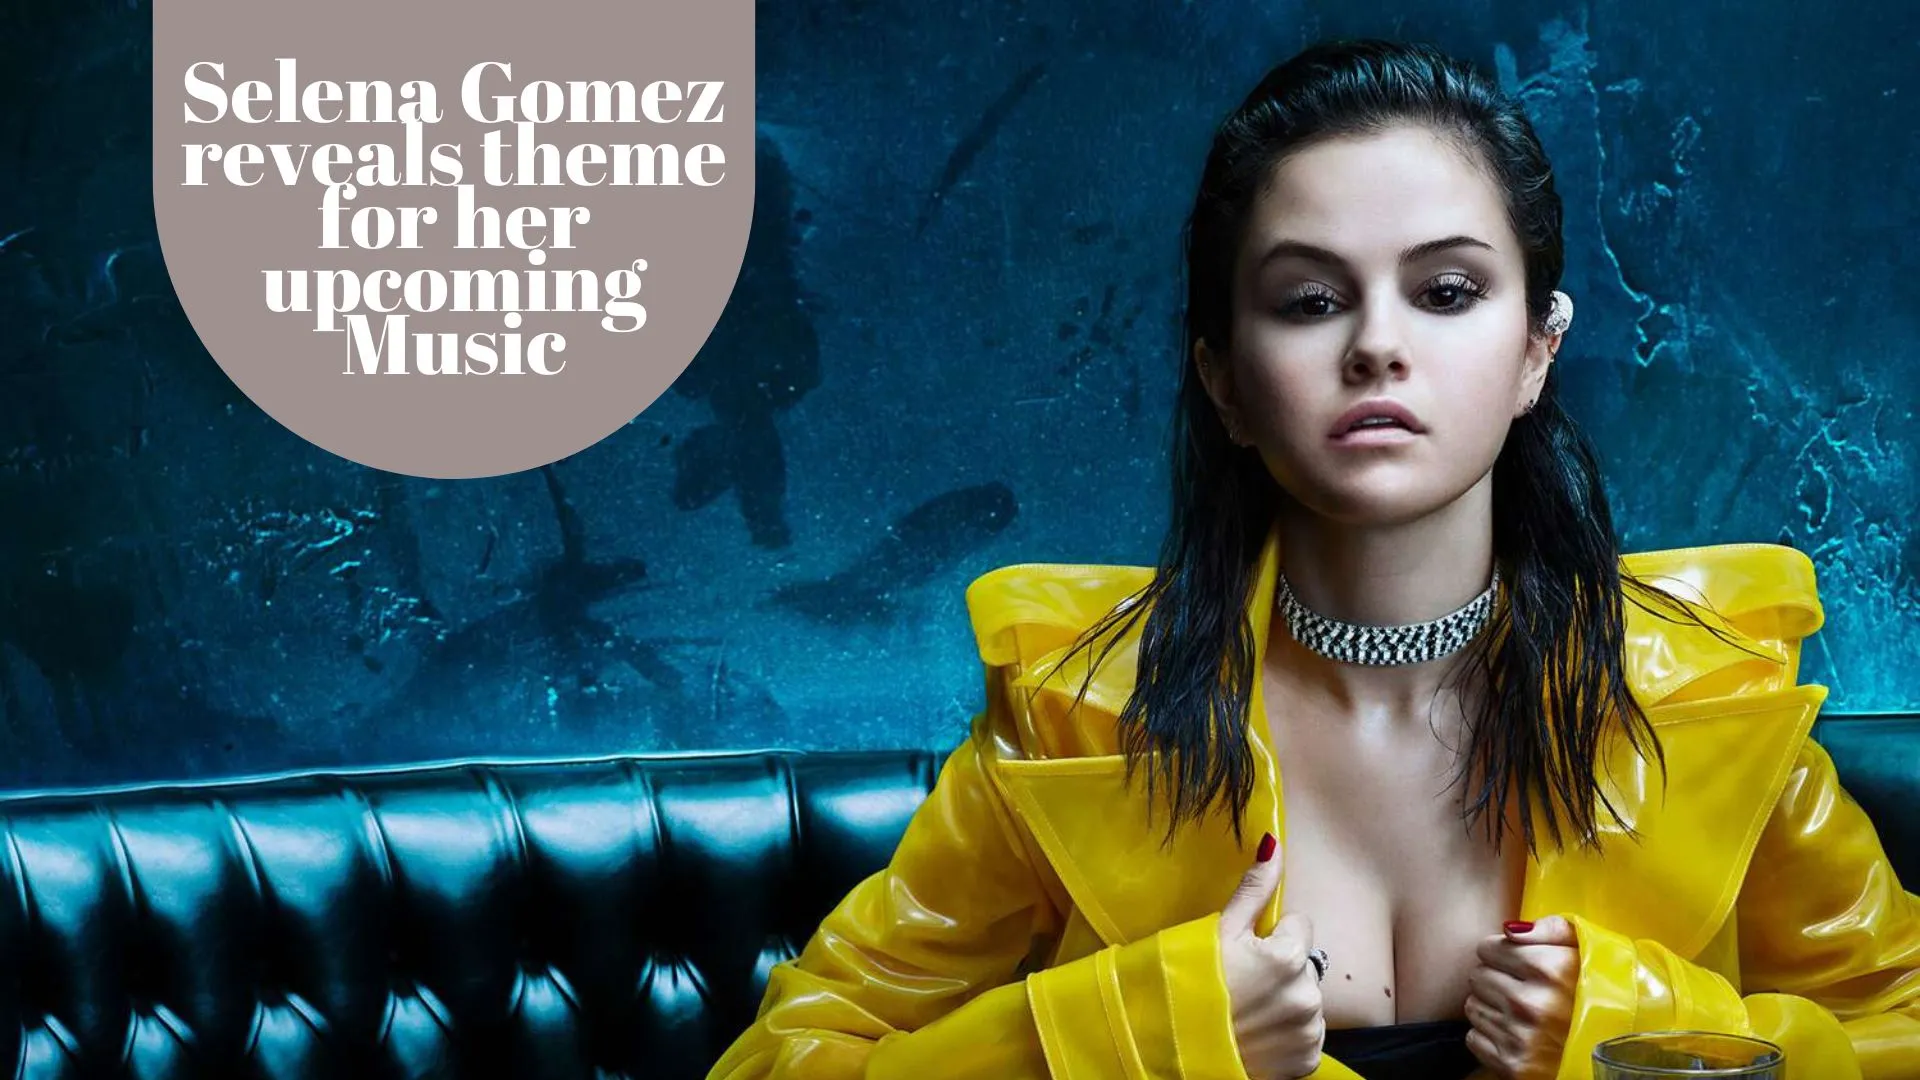 Selena Gomez reveals theme for her upcoming Music (Image credit: People)